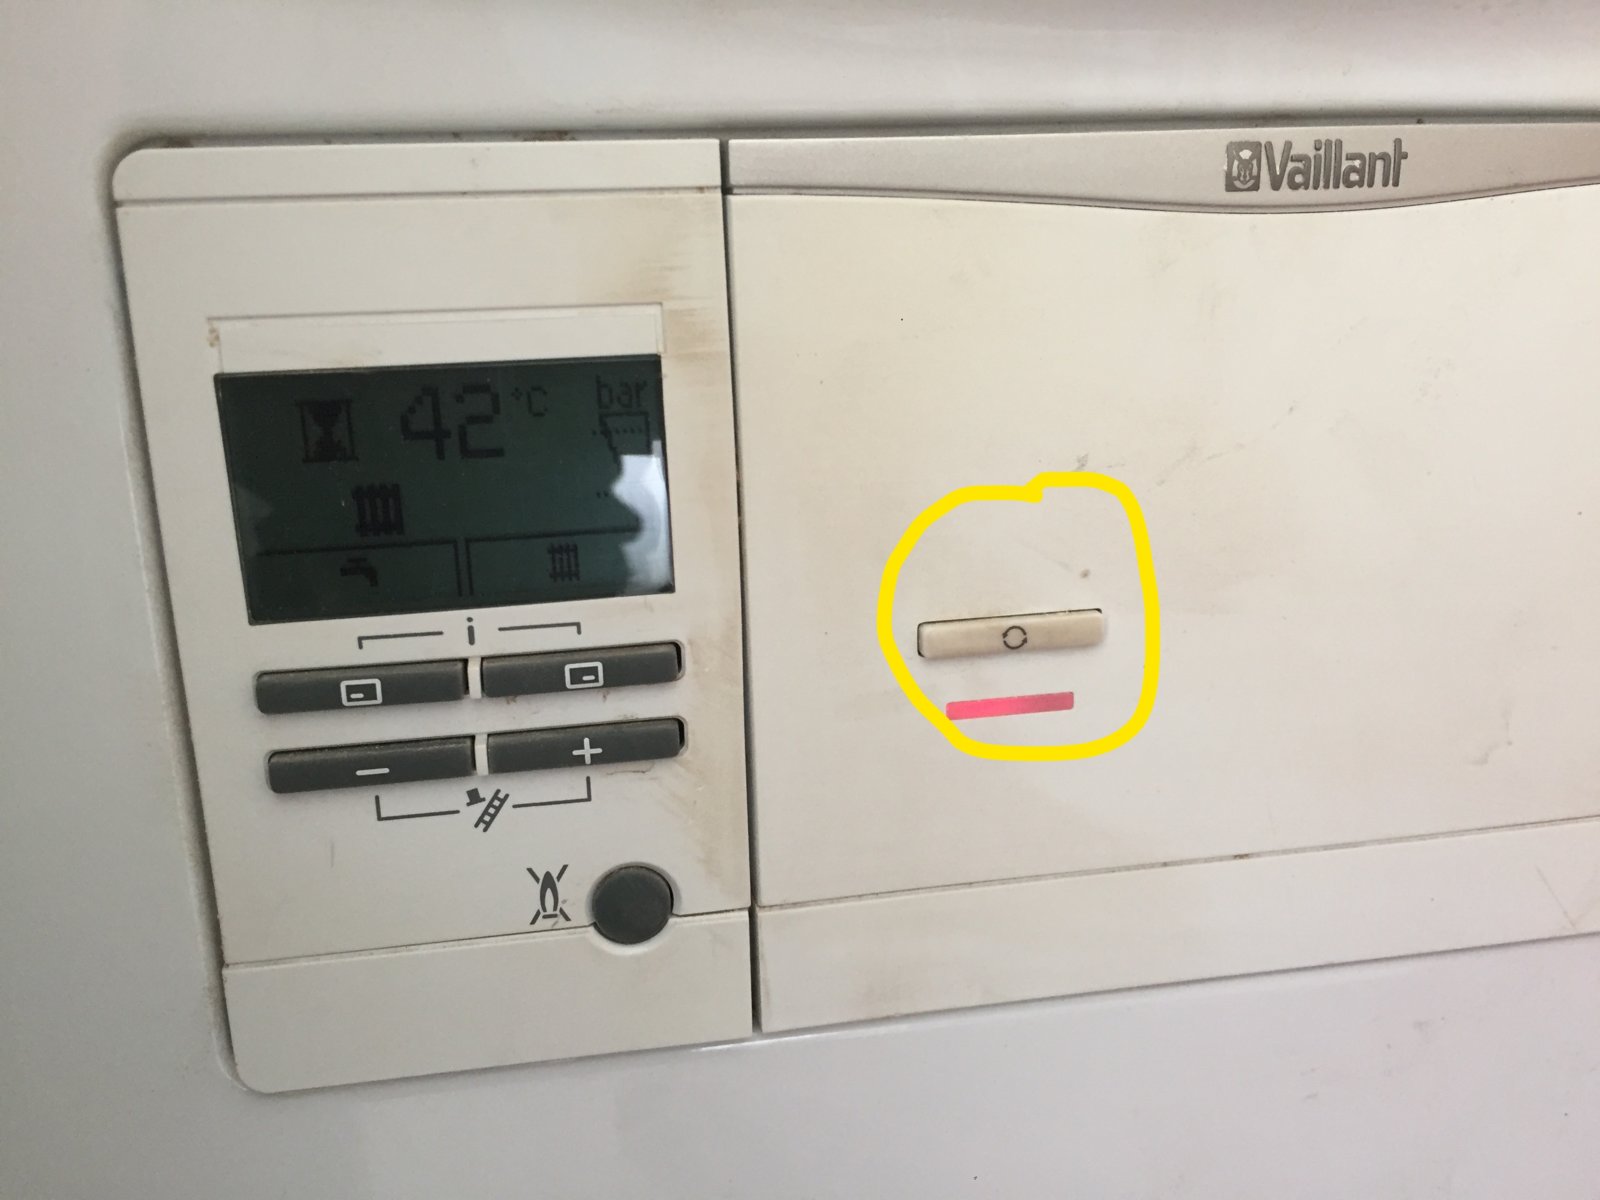 Vaillant Ecotec Pro 28 Anti Cycling and Other Issues | DIYnot Forums